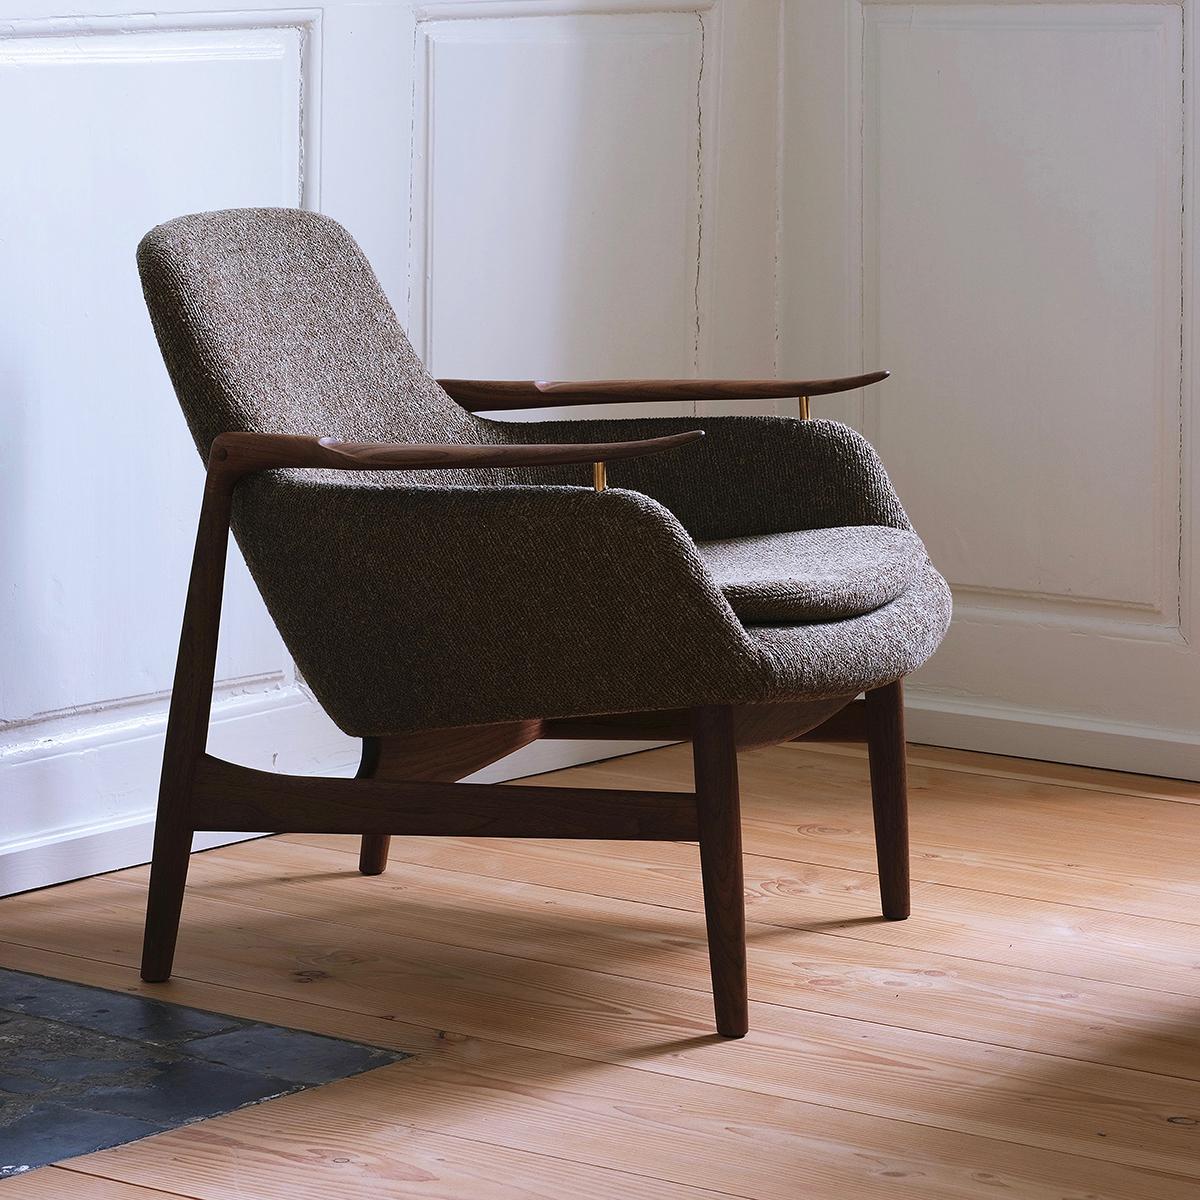 Finn Juhl 53 chair designed by Finn Juhl in 1953, relaunched in 2020.
Manufactured by House of Finn Juhl in Denmark.

The FJ 53 is an extravagant piece of furniture. It integrates the lightness and elegance of a wooden chair with an upholstered